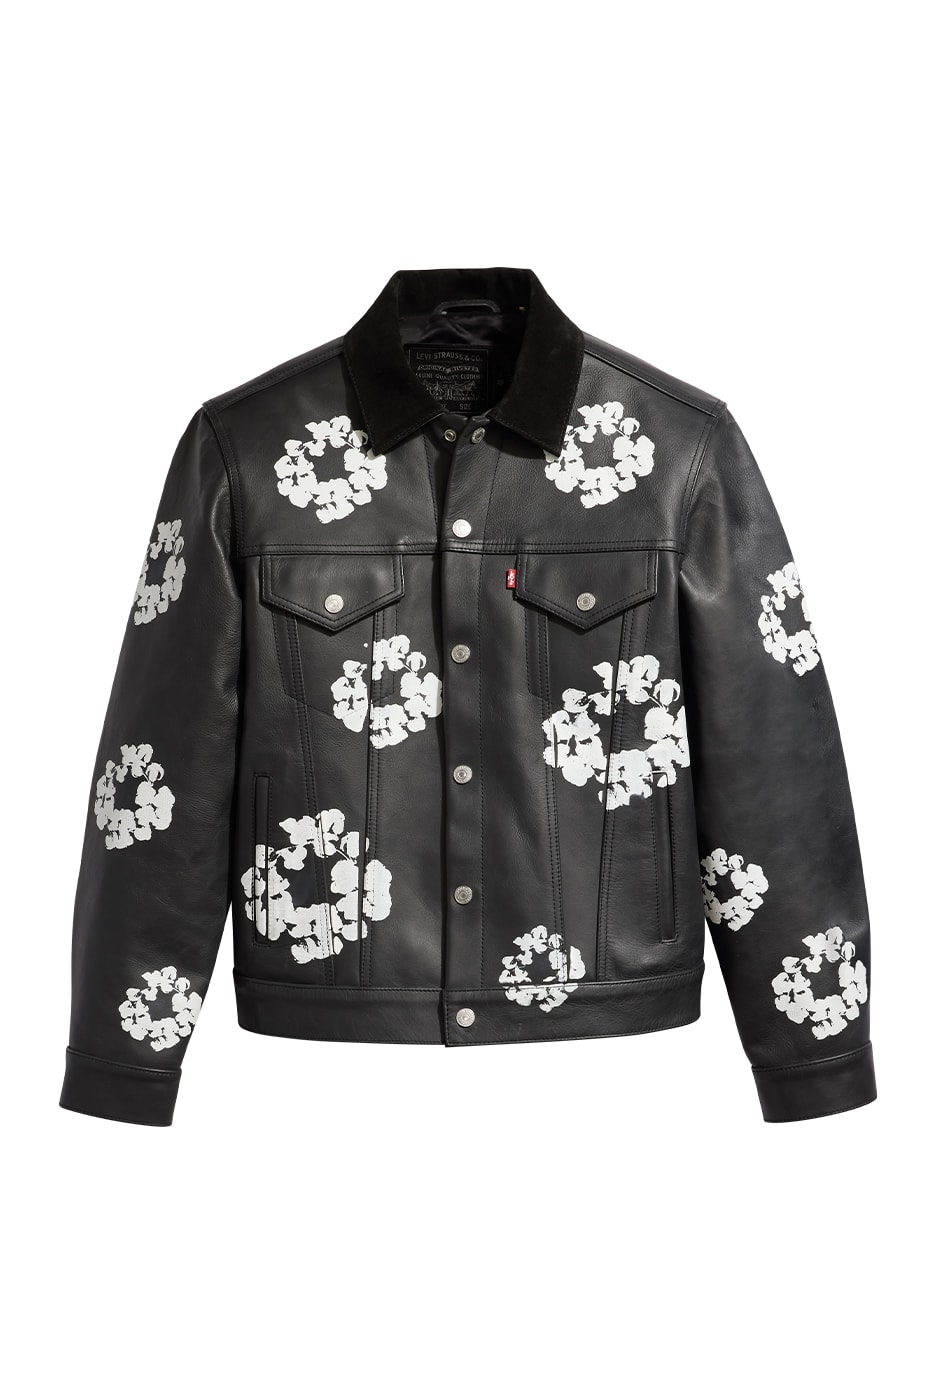 Latest Levi's x Denim Tears Collaboration Pays Homage to the Black Biker Community release info tremaine emory jeans leather jackets motorcycle